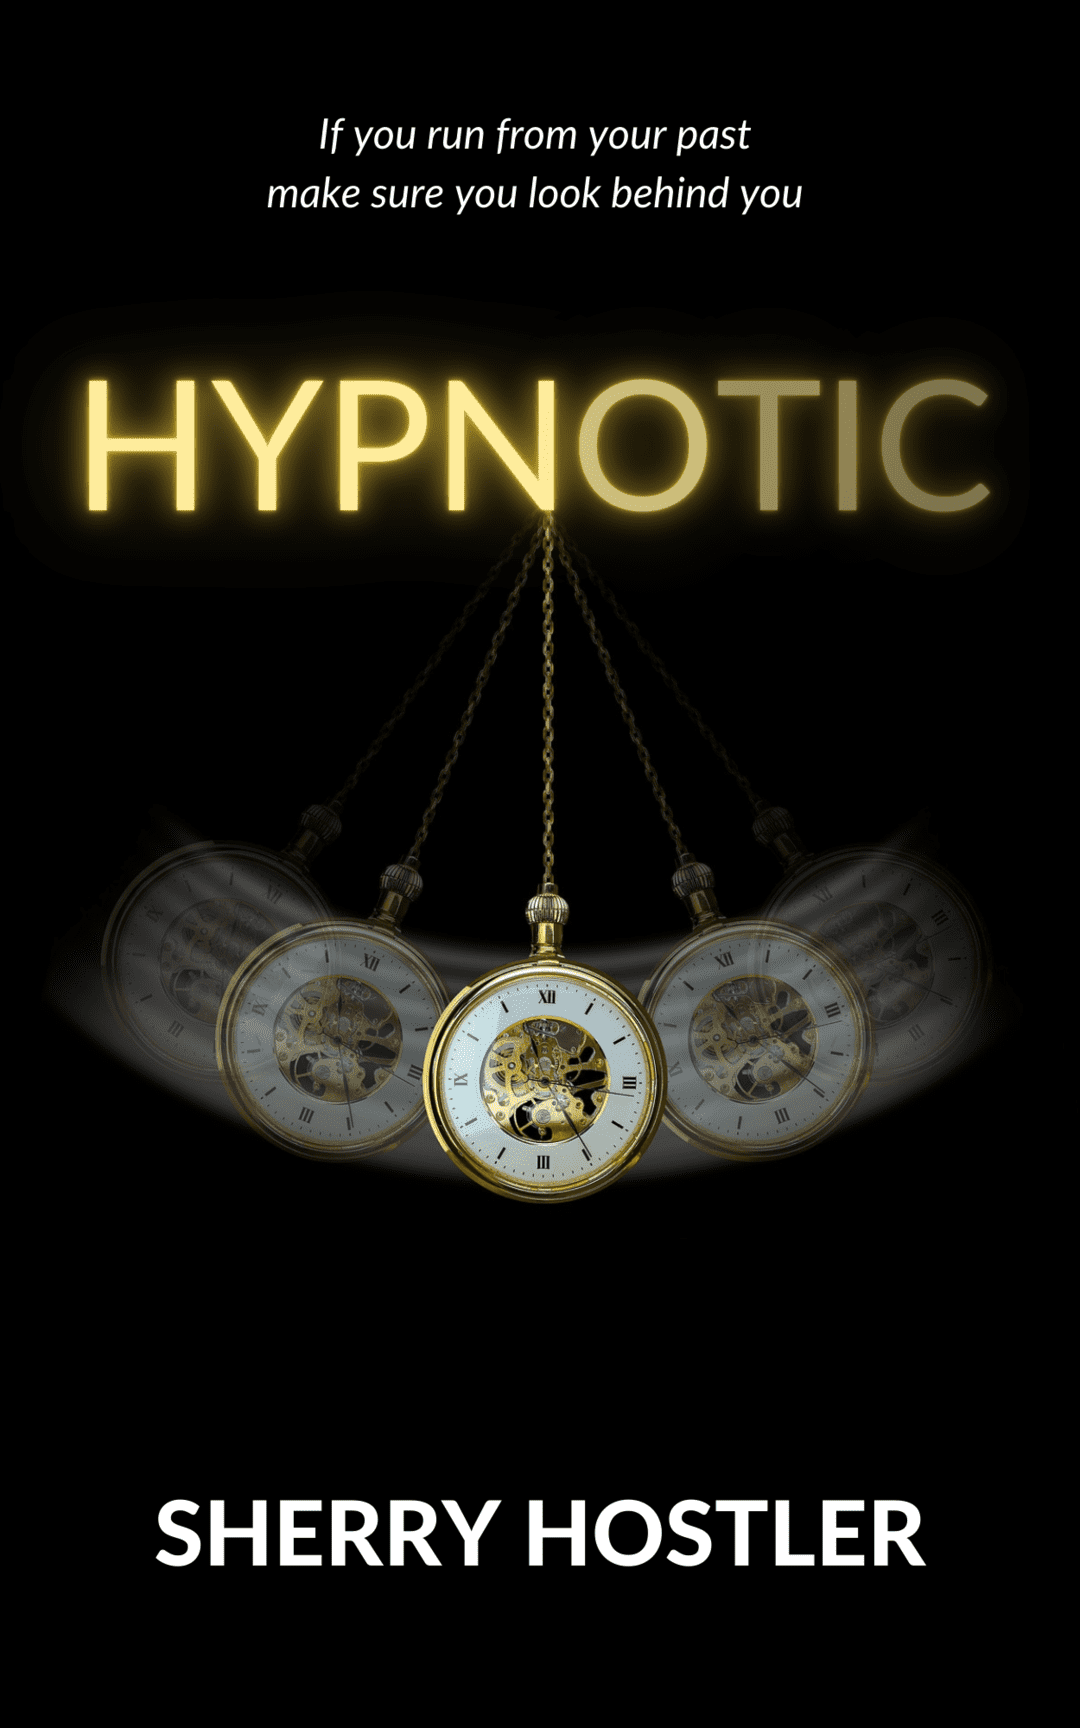 Hypnotic by Sherry Hostler book cover